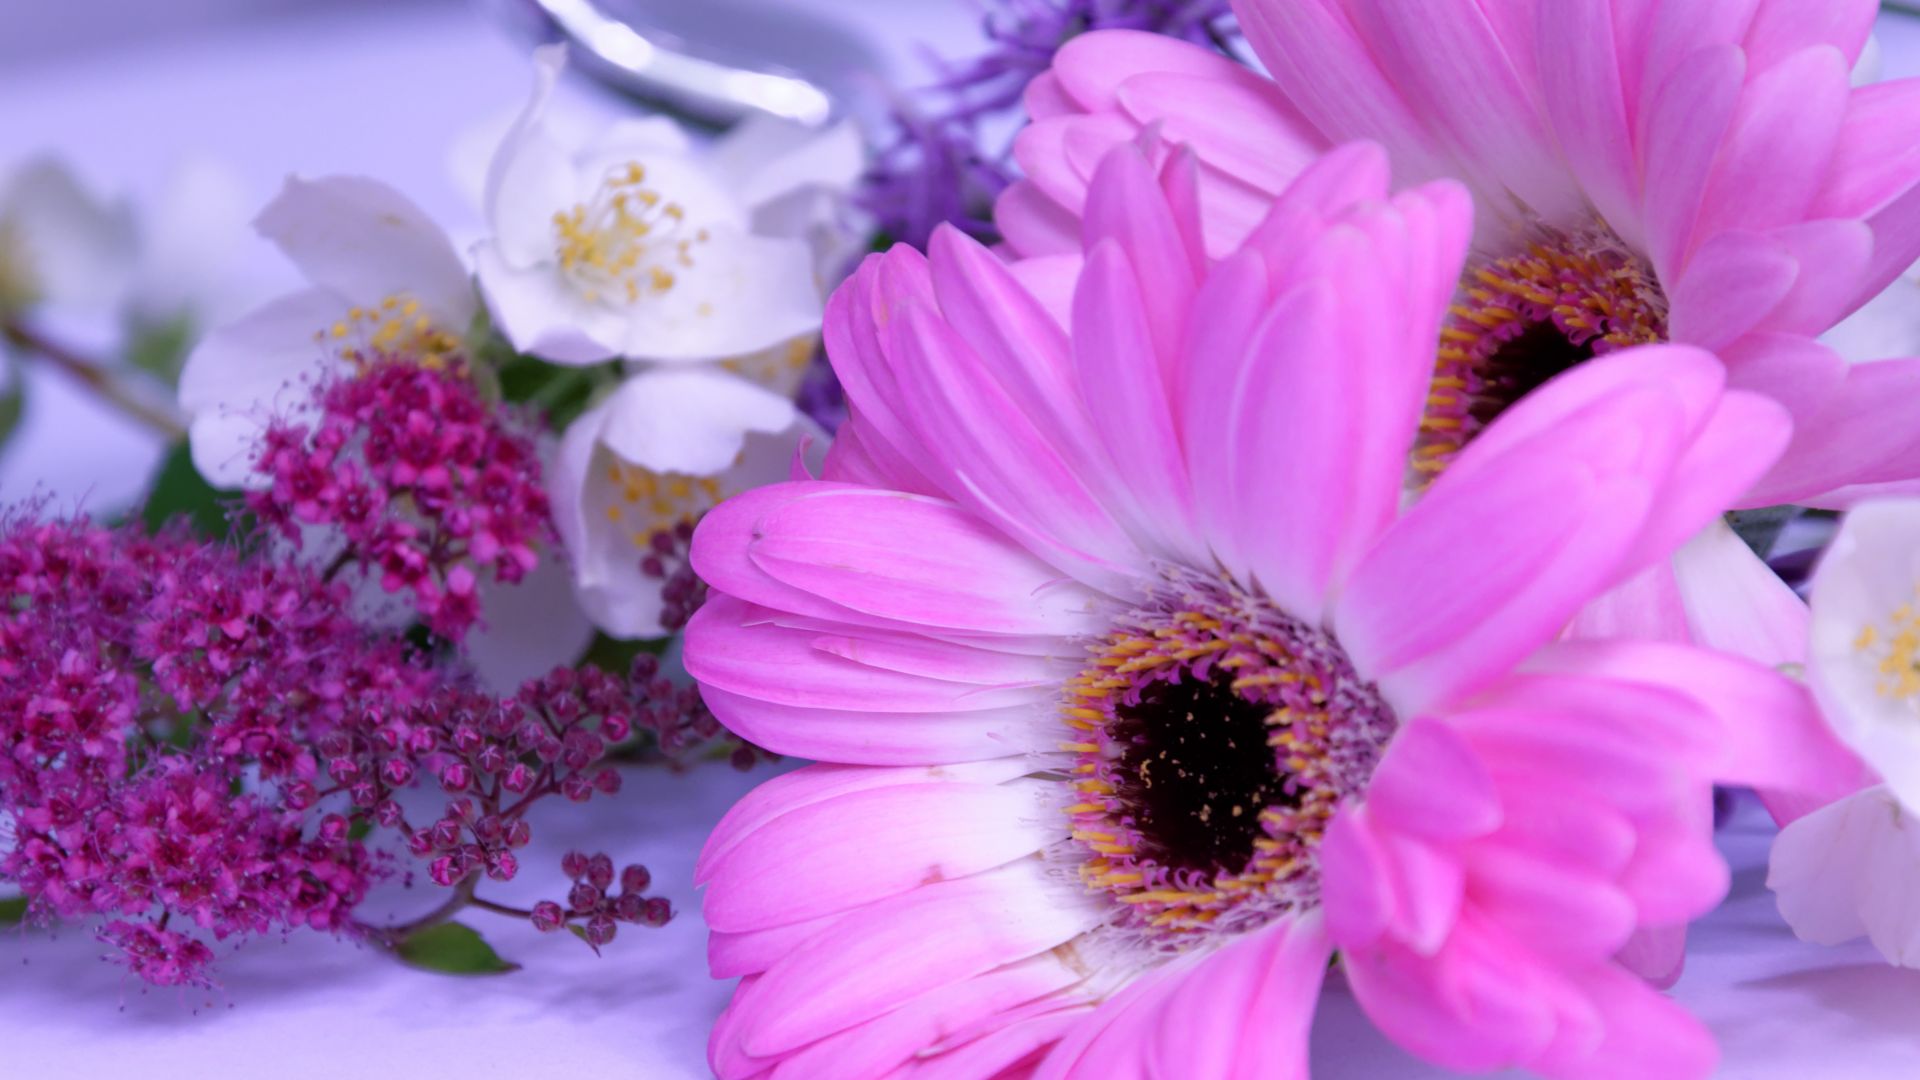 Desktop Wallpaper Flowers, Pink Daisy, White Jasmine, Hd Image, Picture,  Background, C57a29